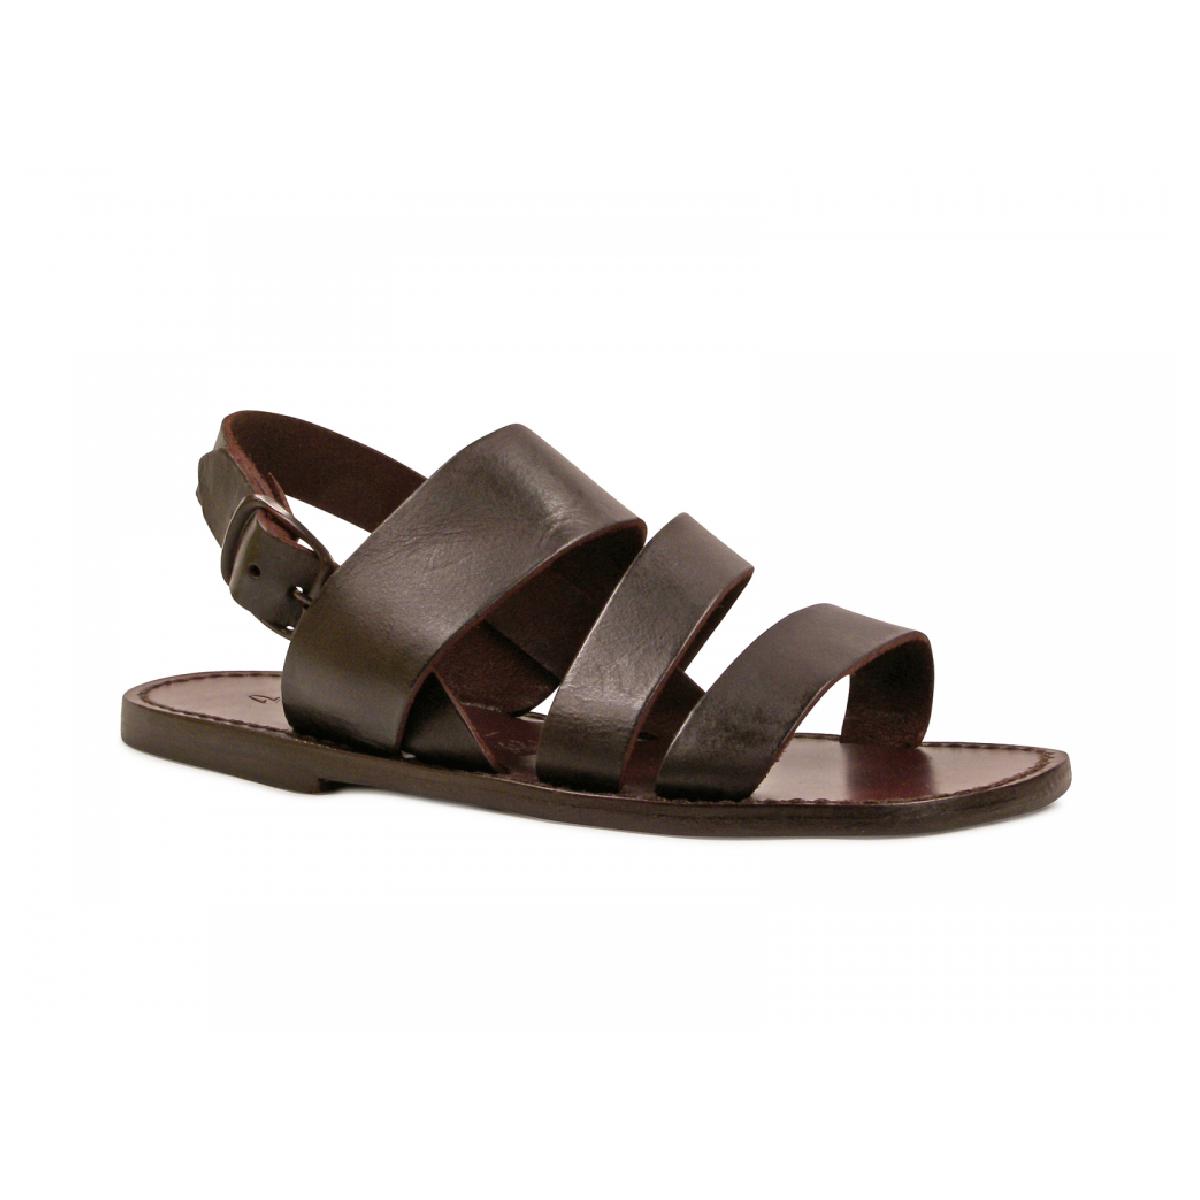 Brown leather sandals handmade in Italy for men's | Gianluca - The ...